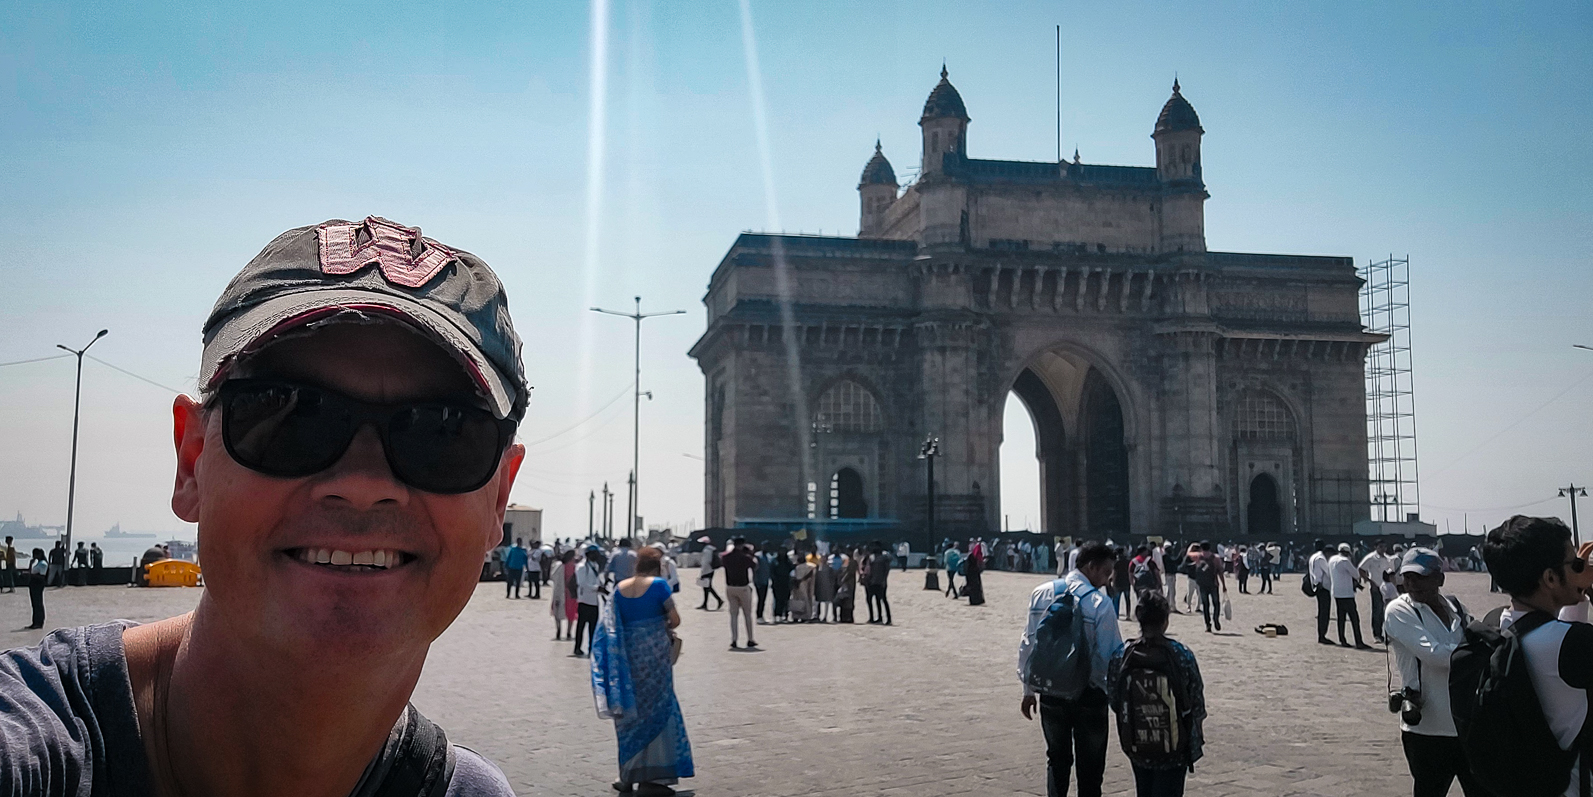 <span  class="uc_style_uc_tiles_grid_image_elementor_uc_items_attribute_title" style="color:#ffffff;">Gateway of India</span>